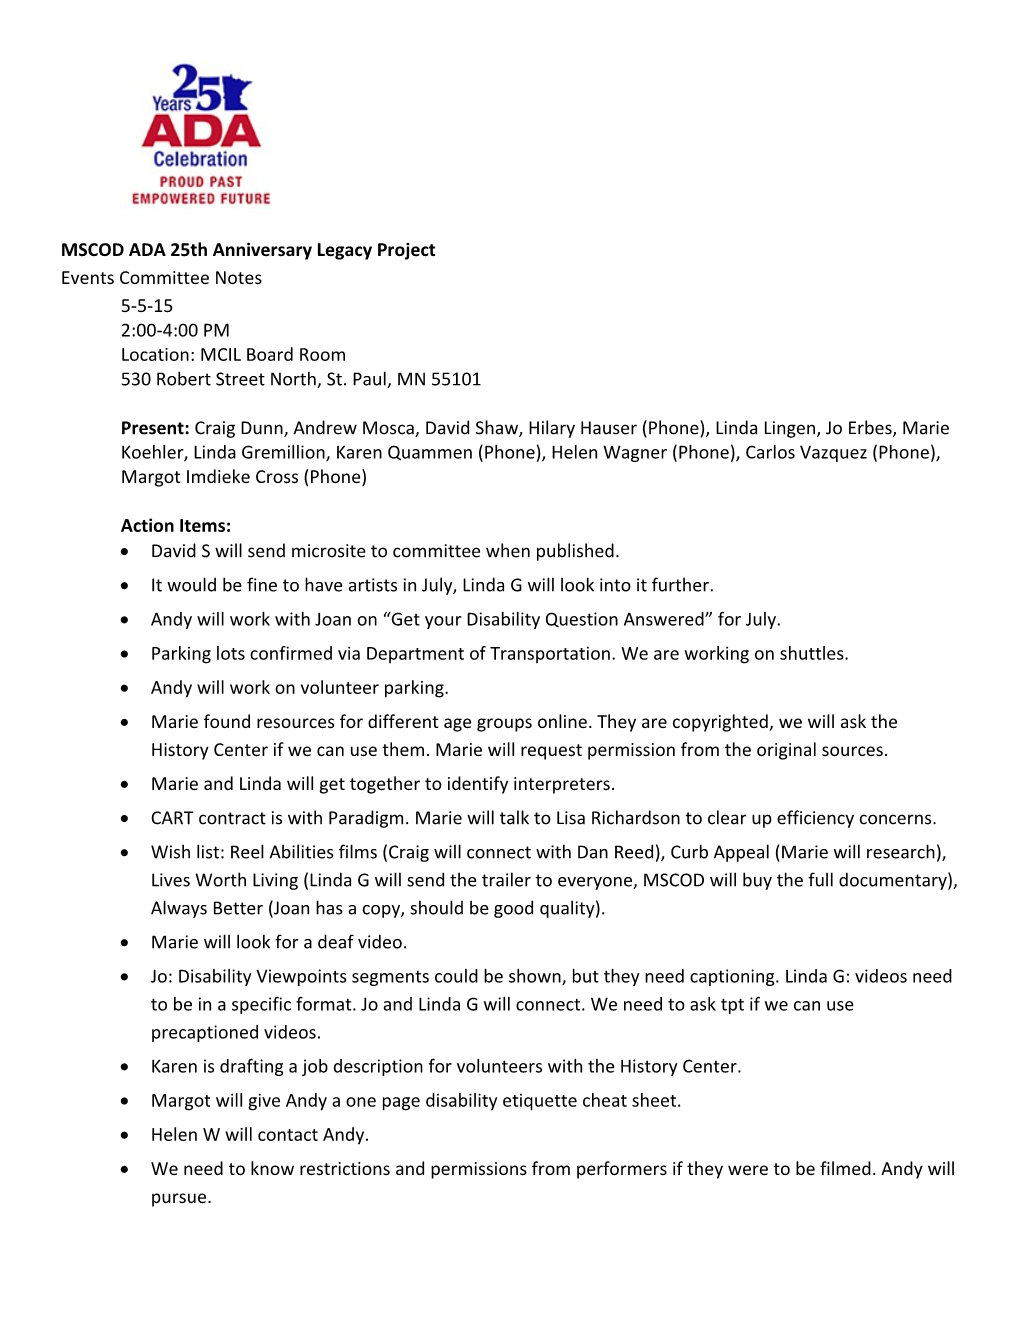 Events Committee Notes, 5-5-15